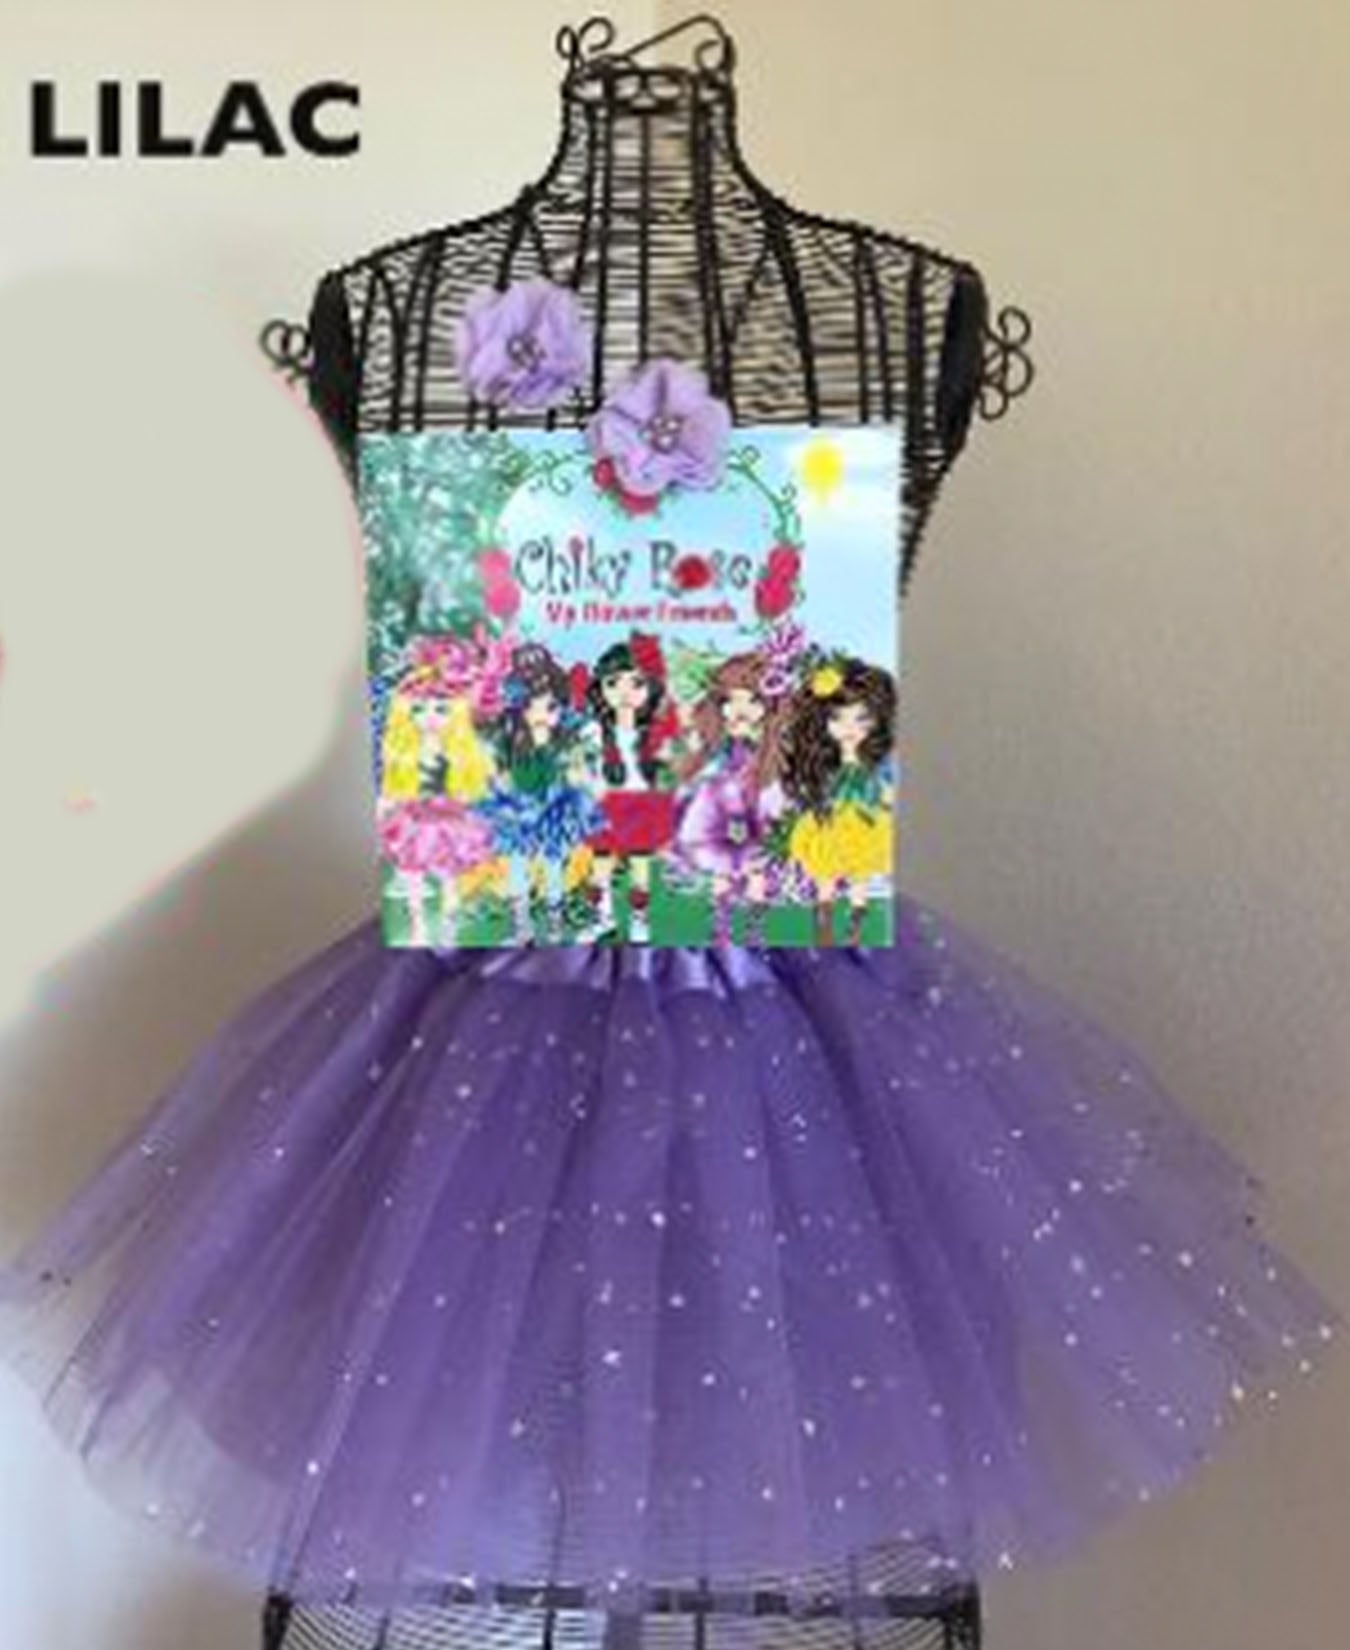 Z Chiky Rose Tutus, Books, Hair Flowers and Stickers